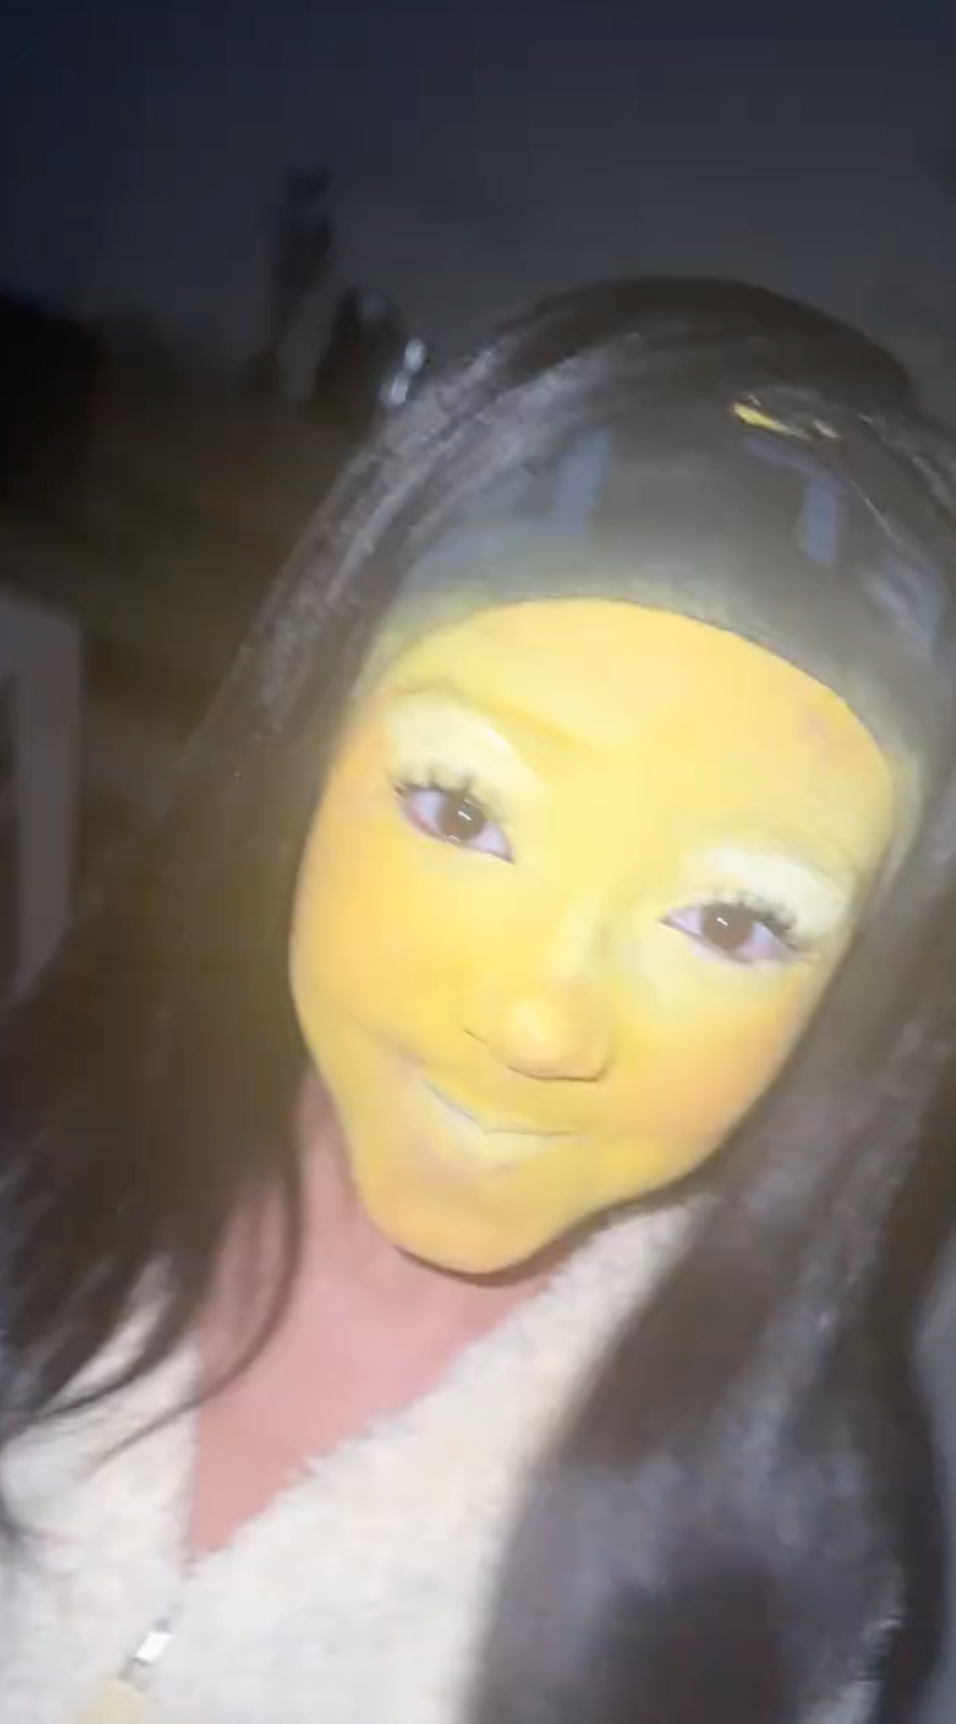 The 10-year-old's younger sister Chicago had on a full face of yellow makeup